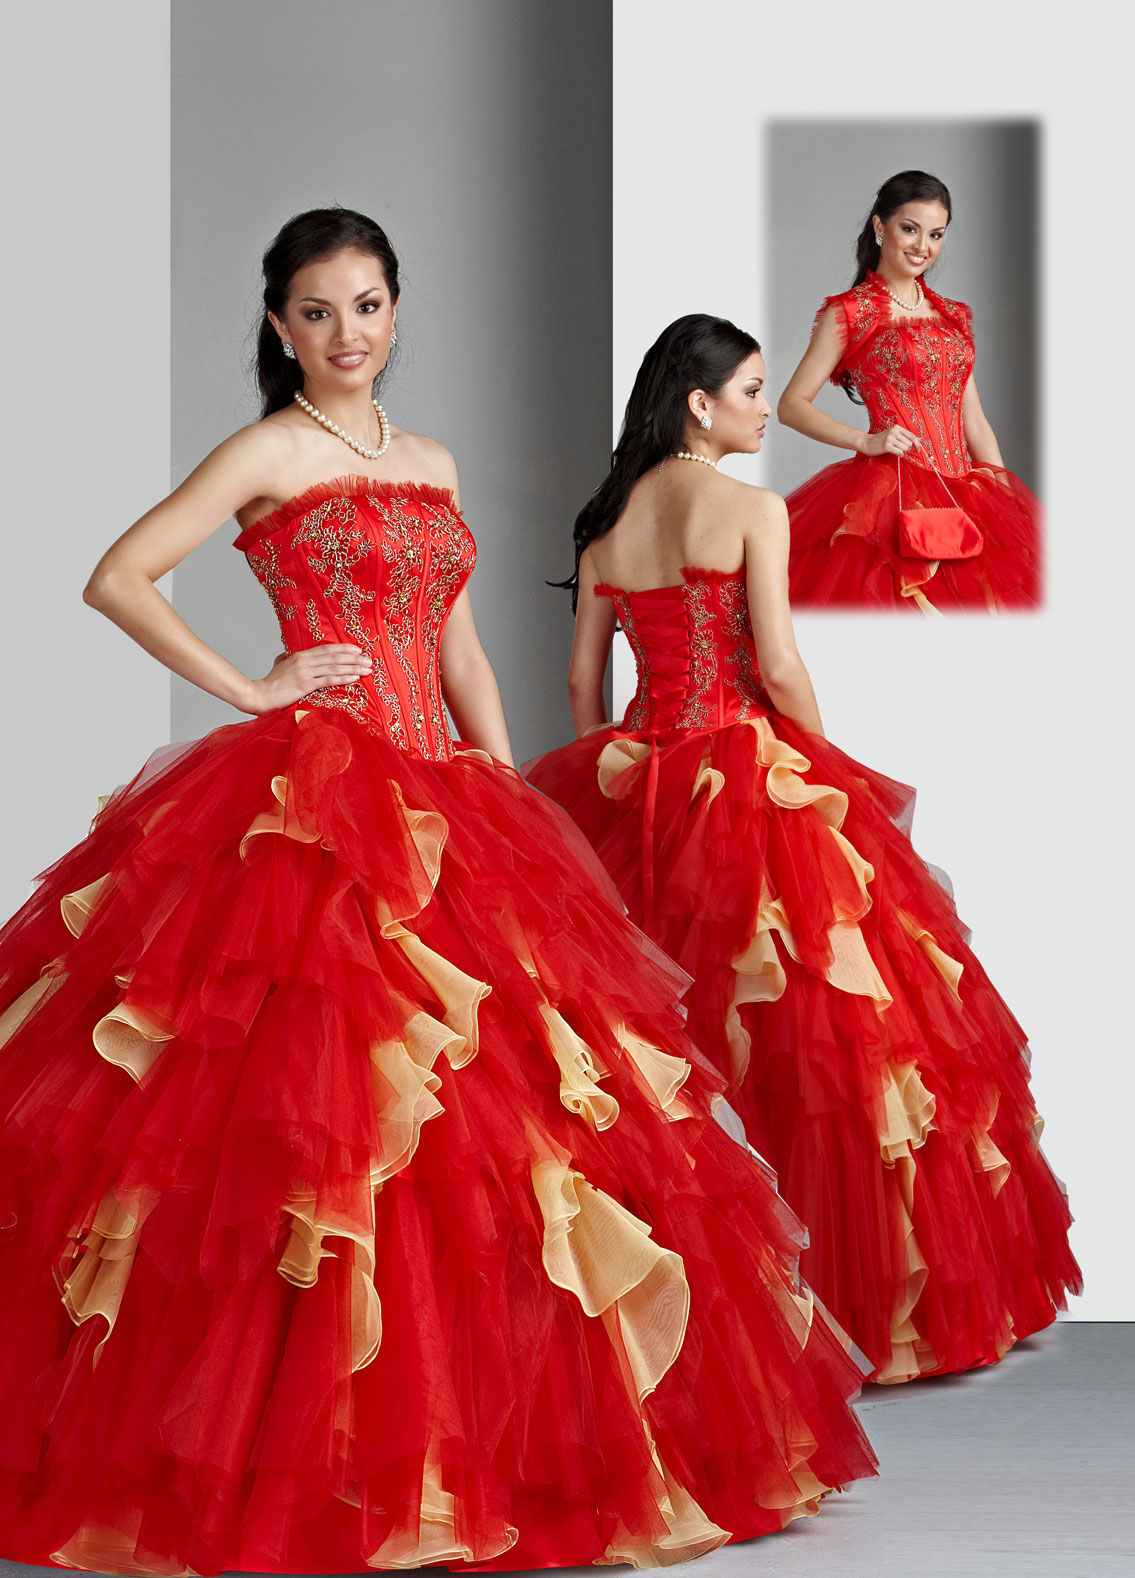 Red And Yellow Prom Dresses Shop, 57 ...